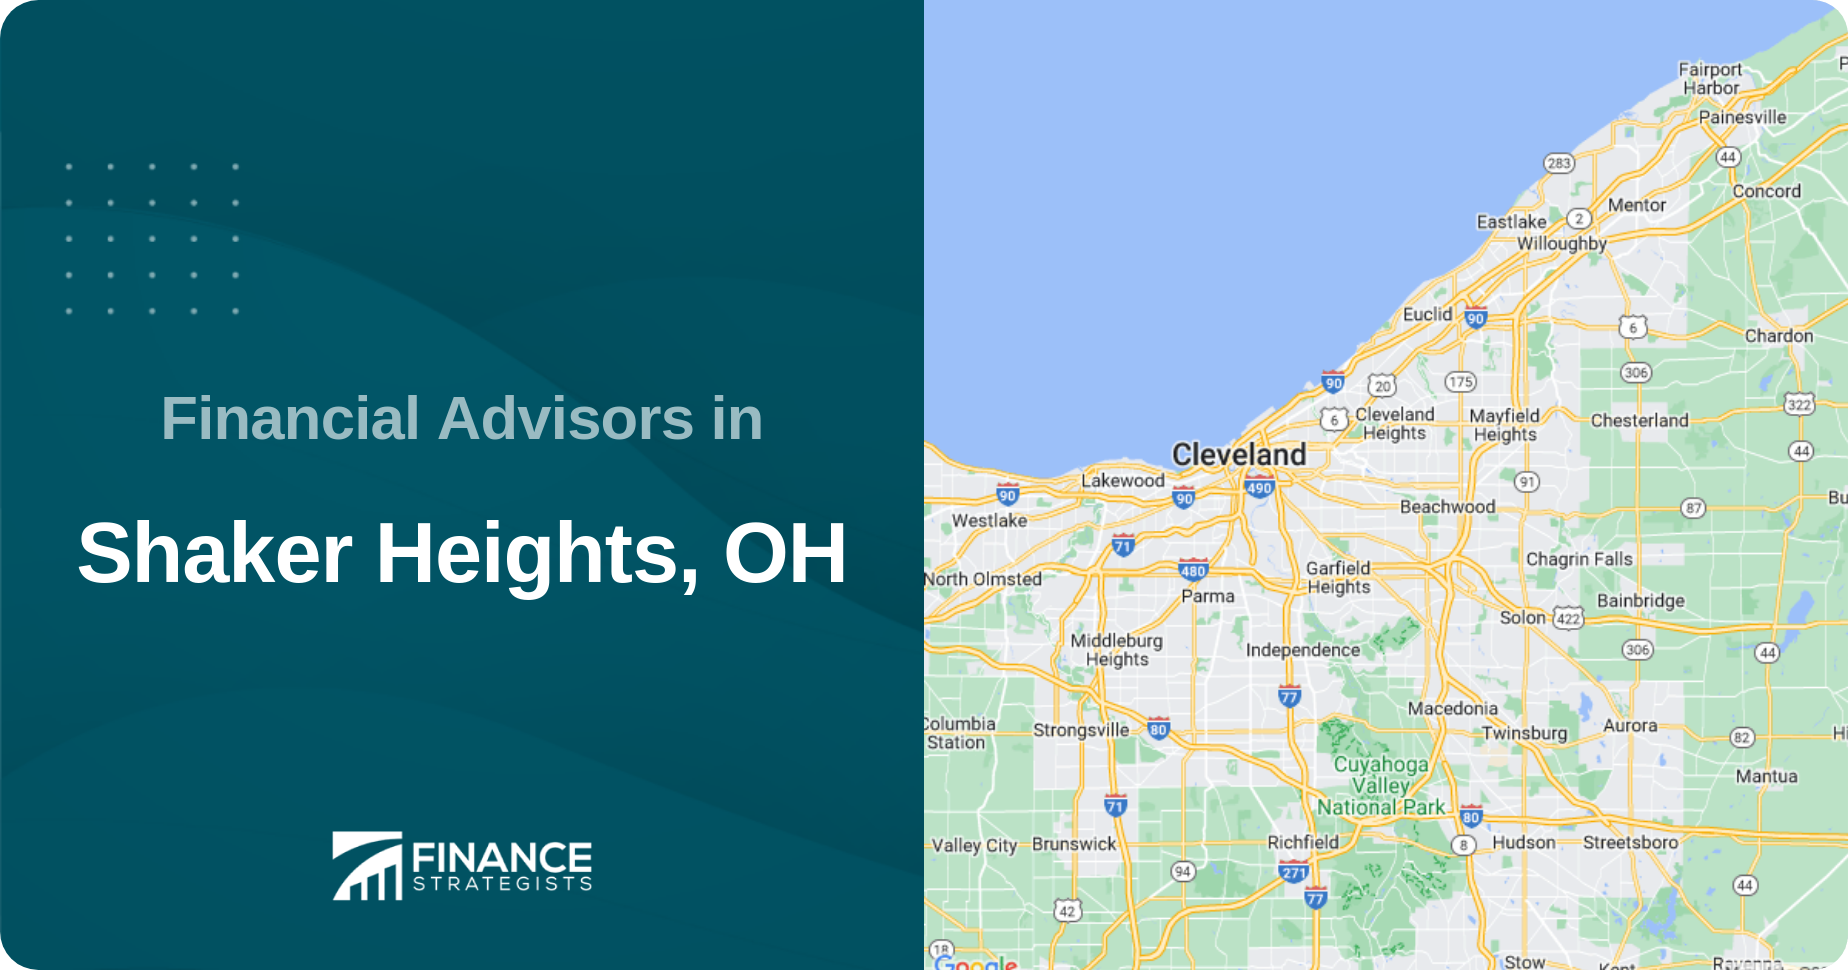 Financial Advisors in Shaker Heights, OH